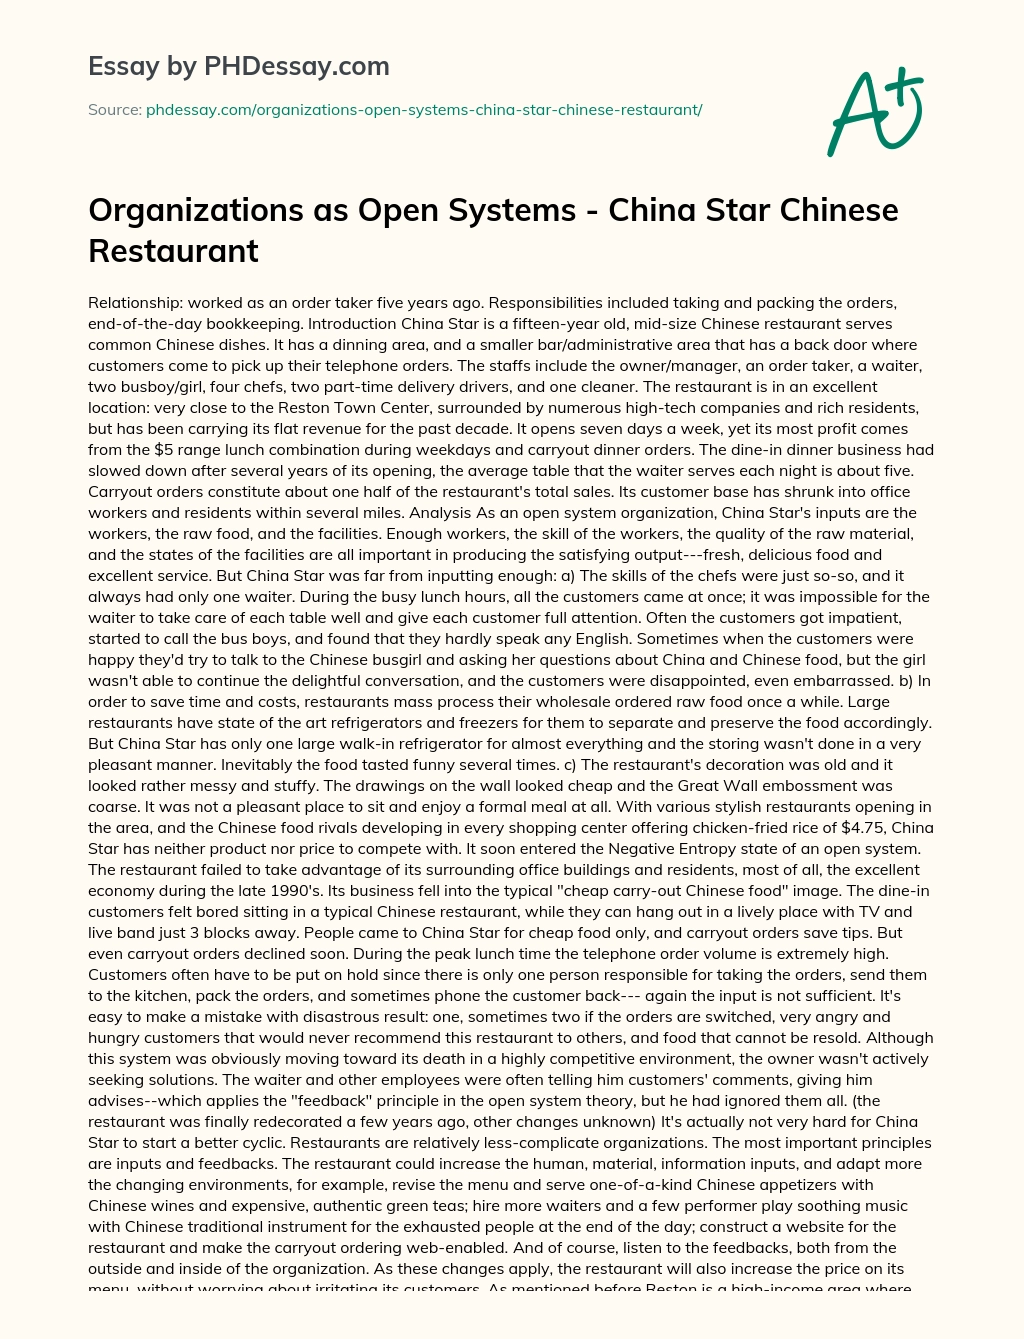 Organizations as Open Systems – China Star Chinese Restaurant essay